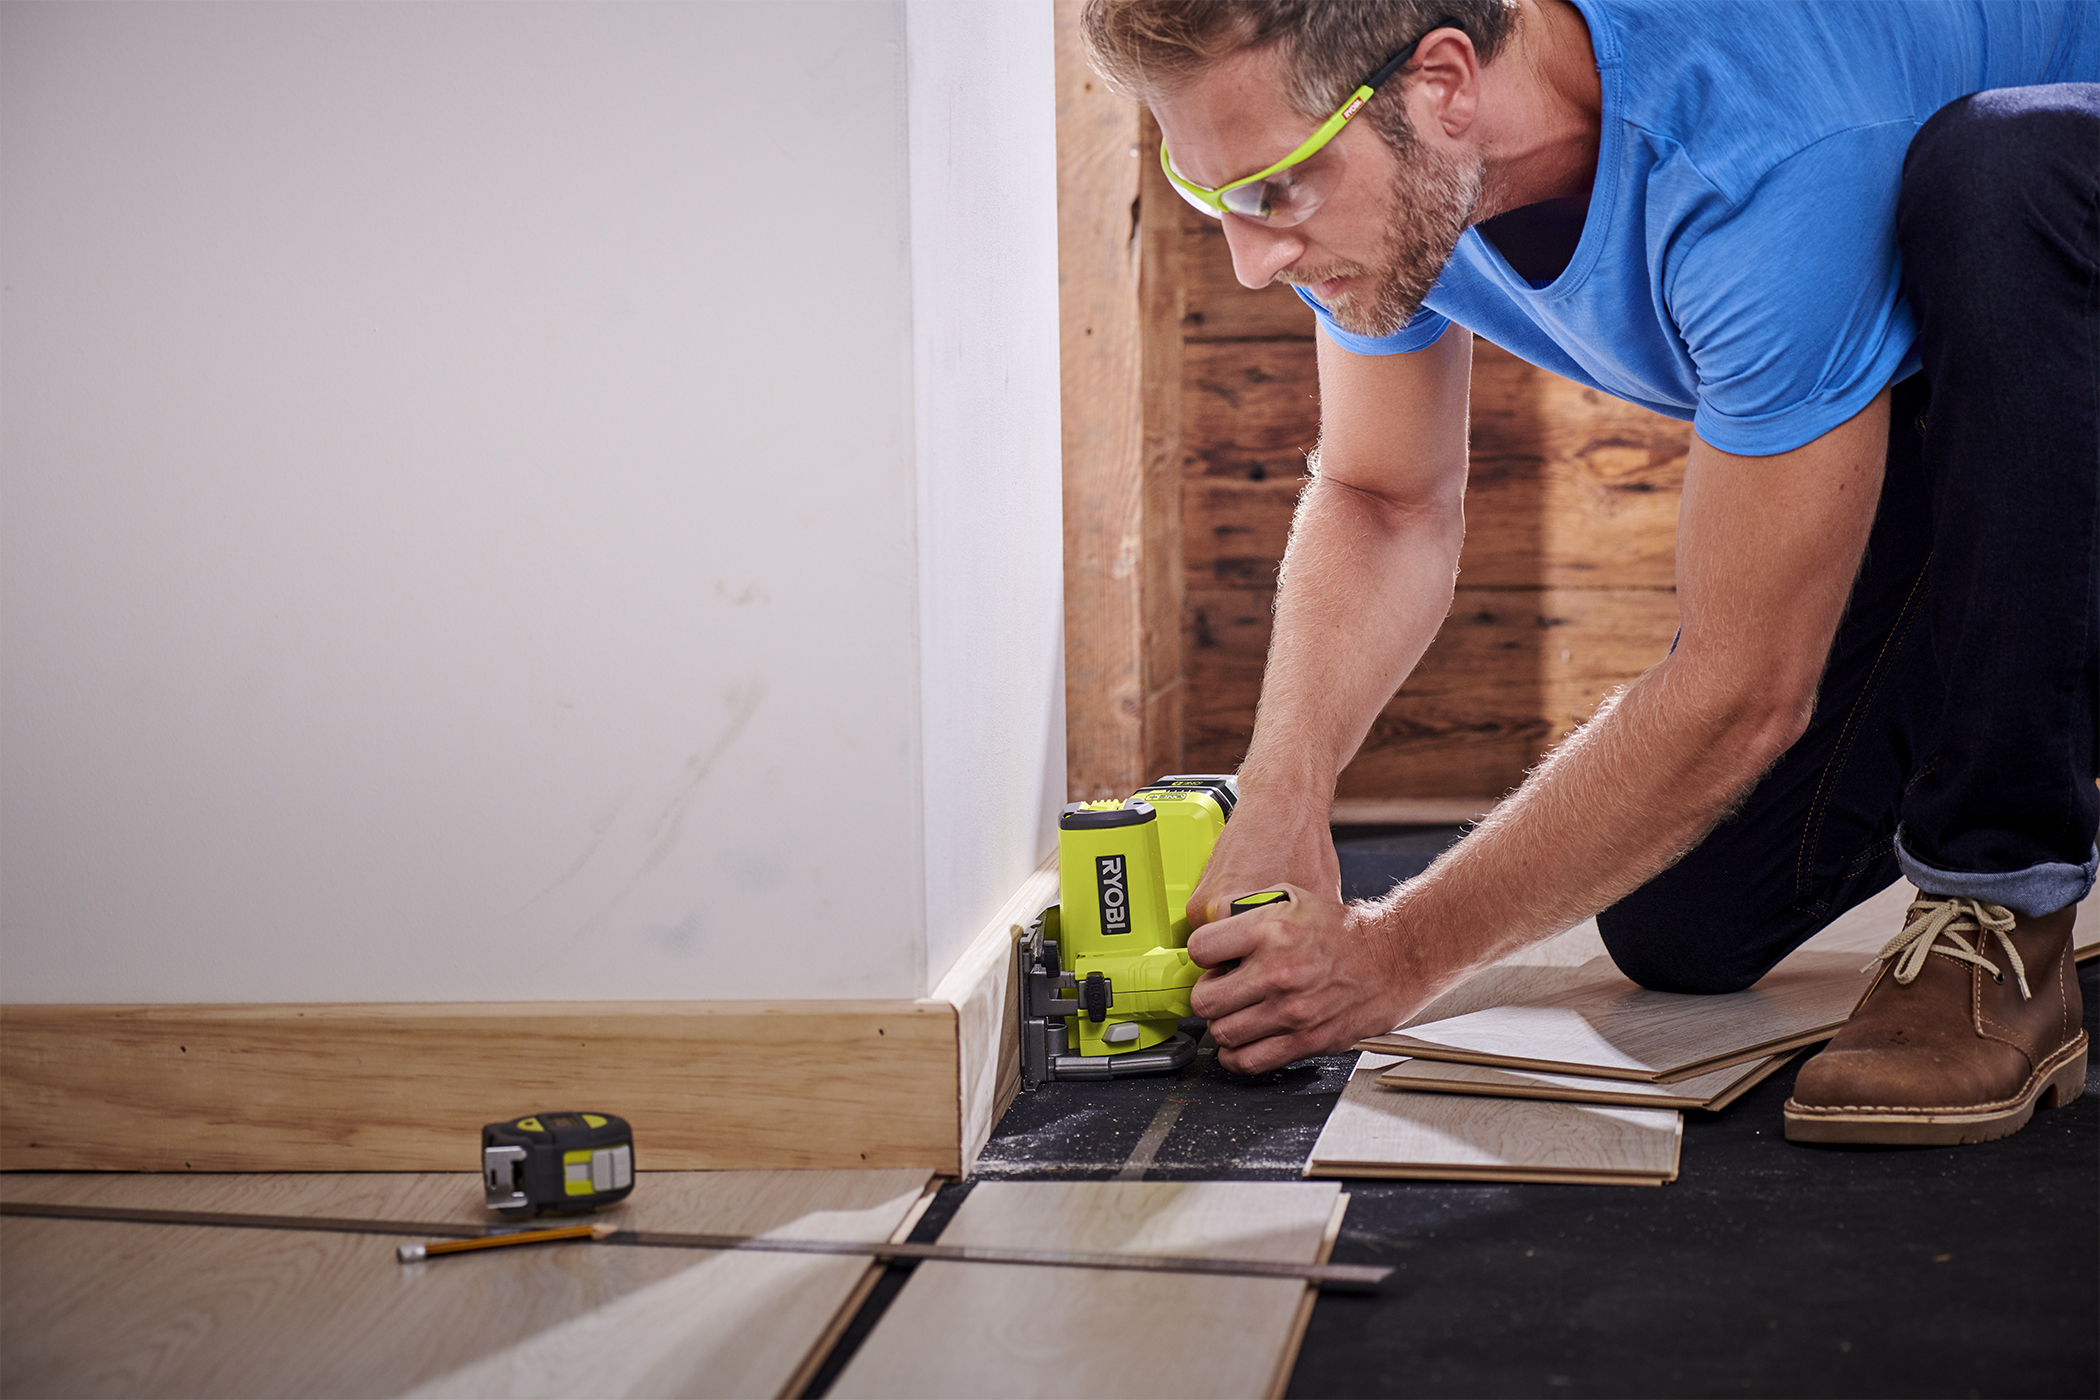 Ryobi 18-Volt One+ Cordless Multi-Material Saw (Tool Only) P555